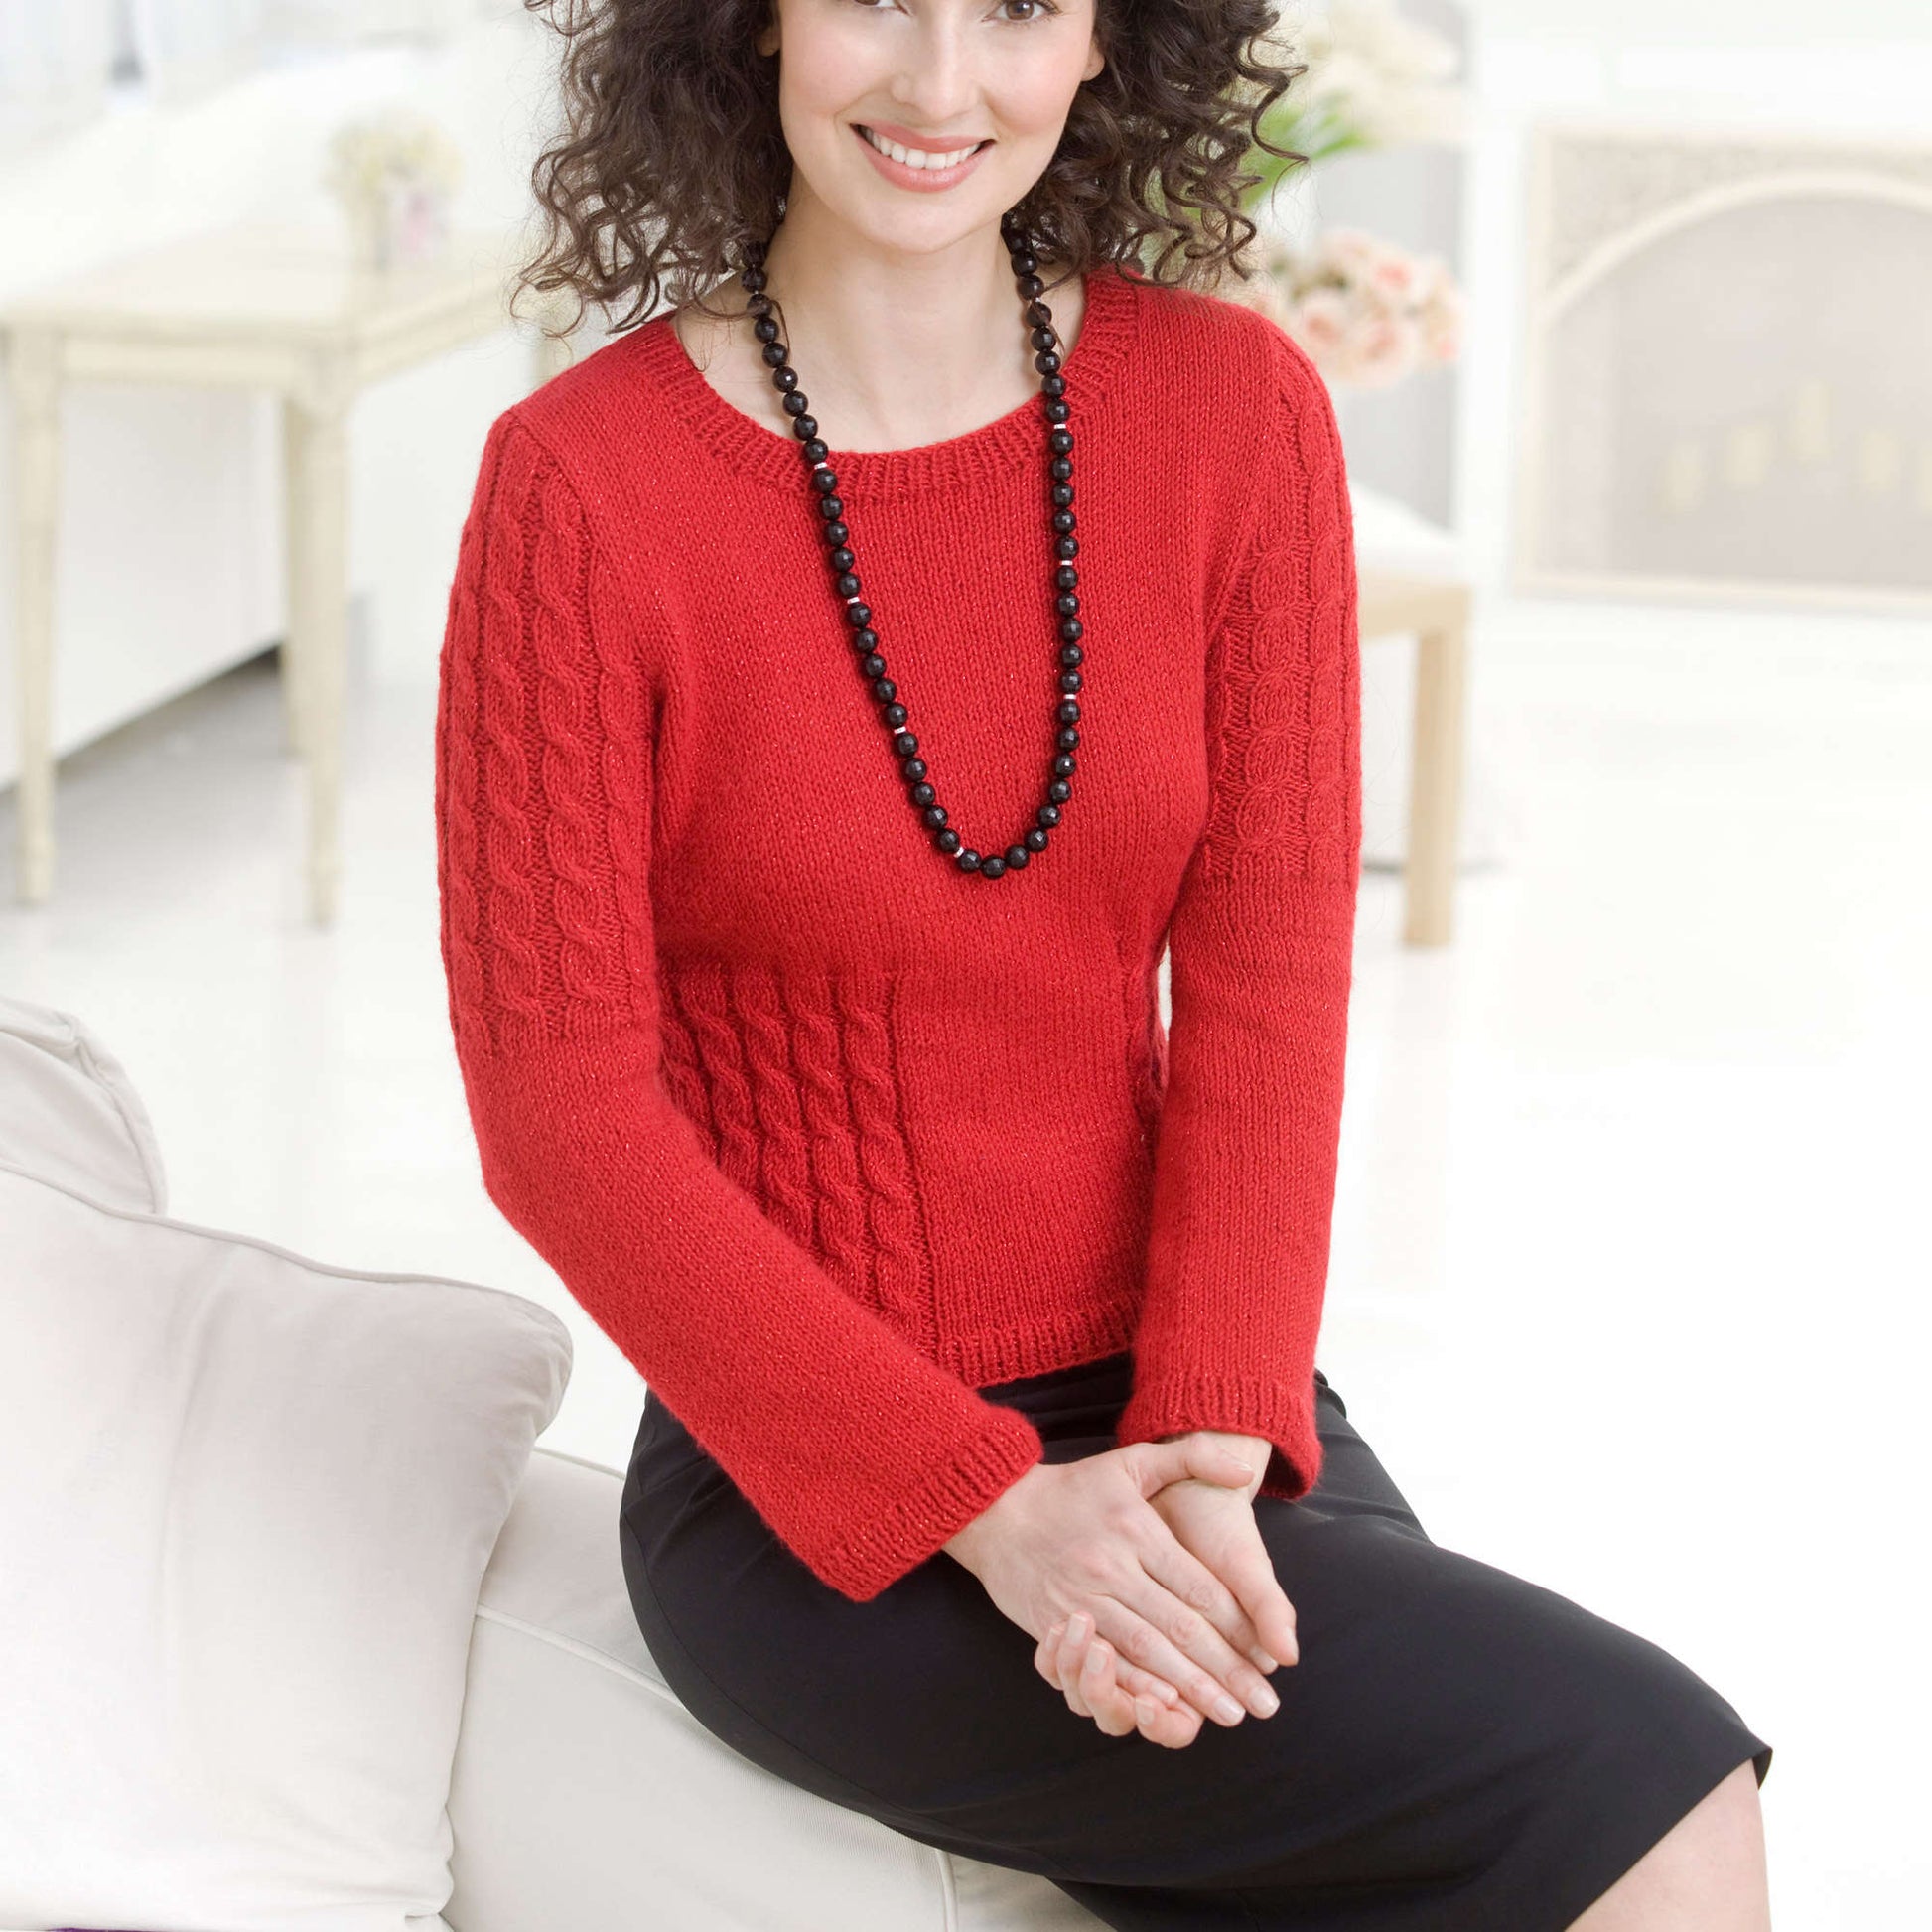 Free Red Heart Knit Chic Cable Sweater Pattern